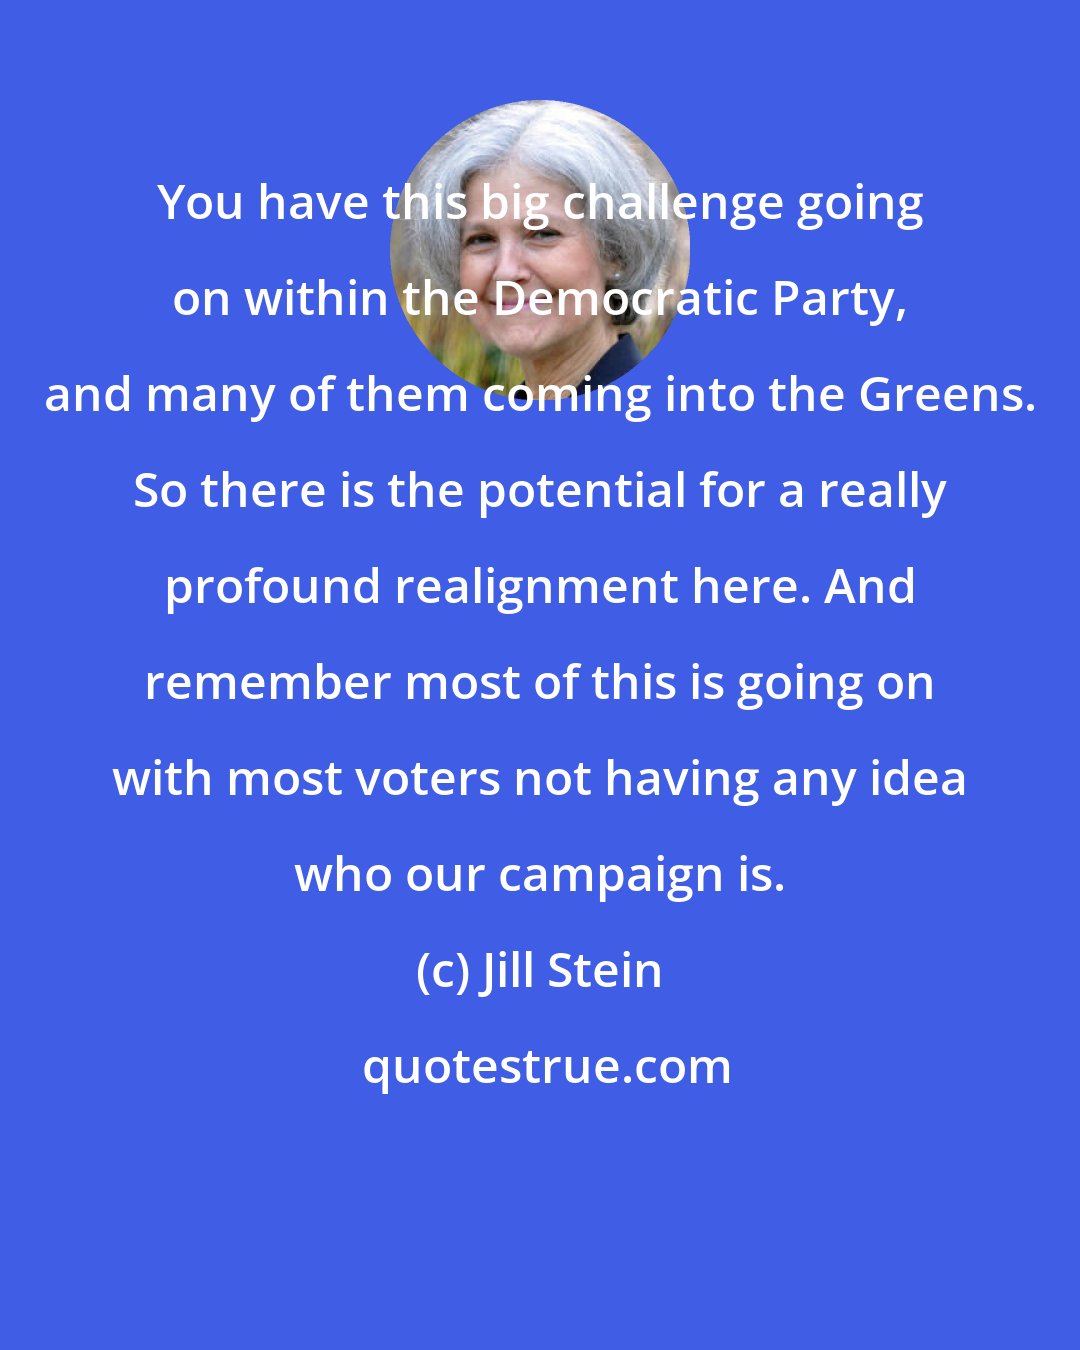 Jill Stein: You have this big challenge going on within the Democratic Party, and many of them coming into the Greens. So there is the potential for a really profound realignment here. And remember most of this is going on with most voters not having any idea who our campaign is.